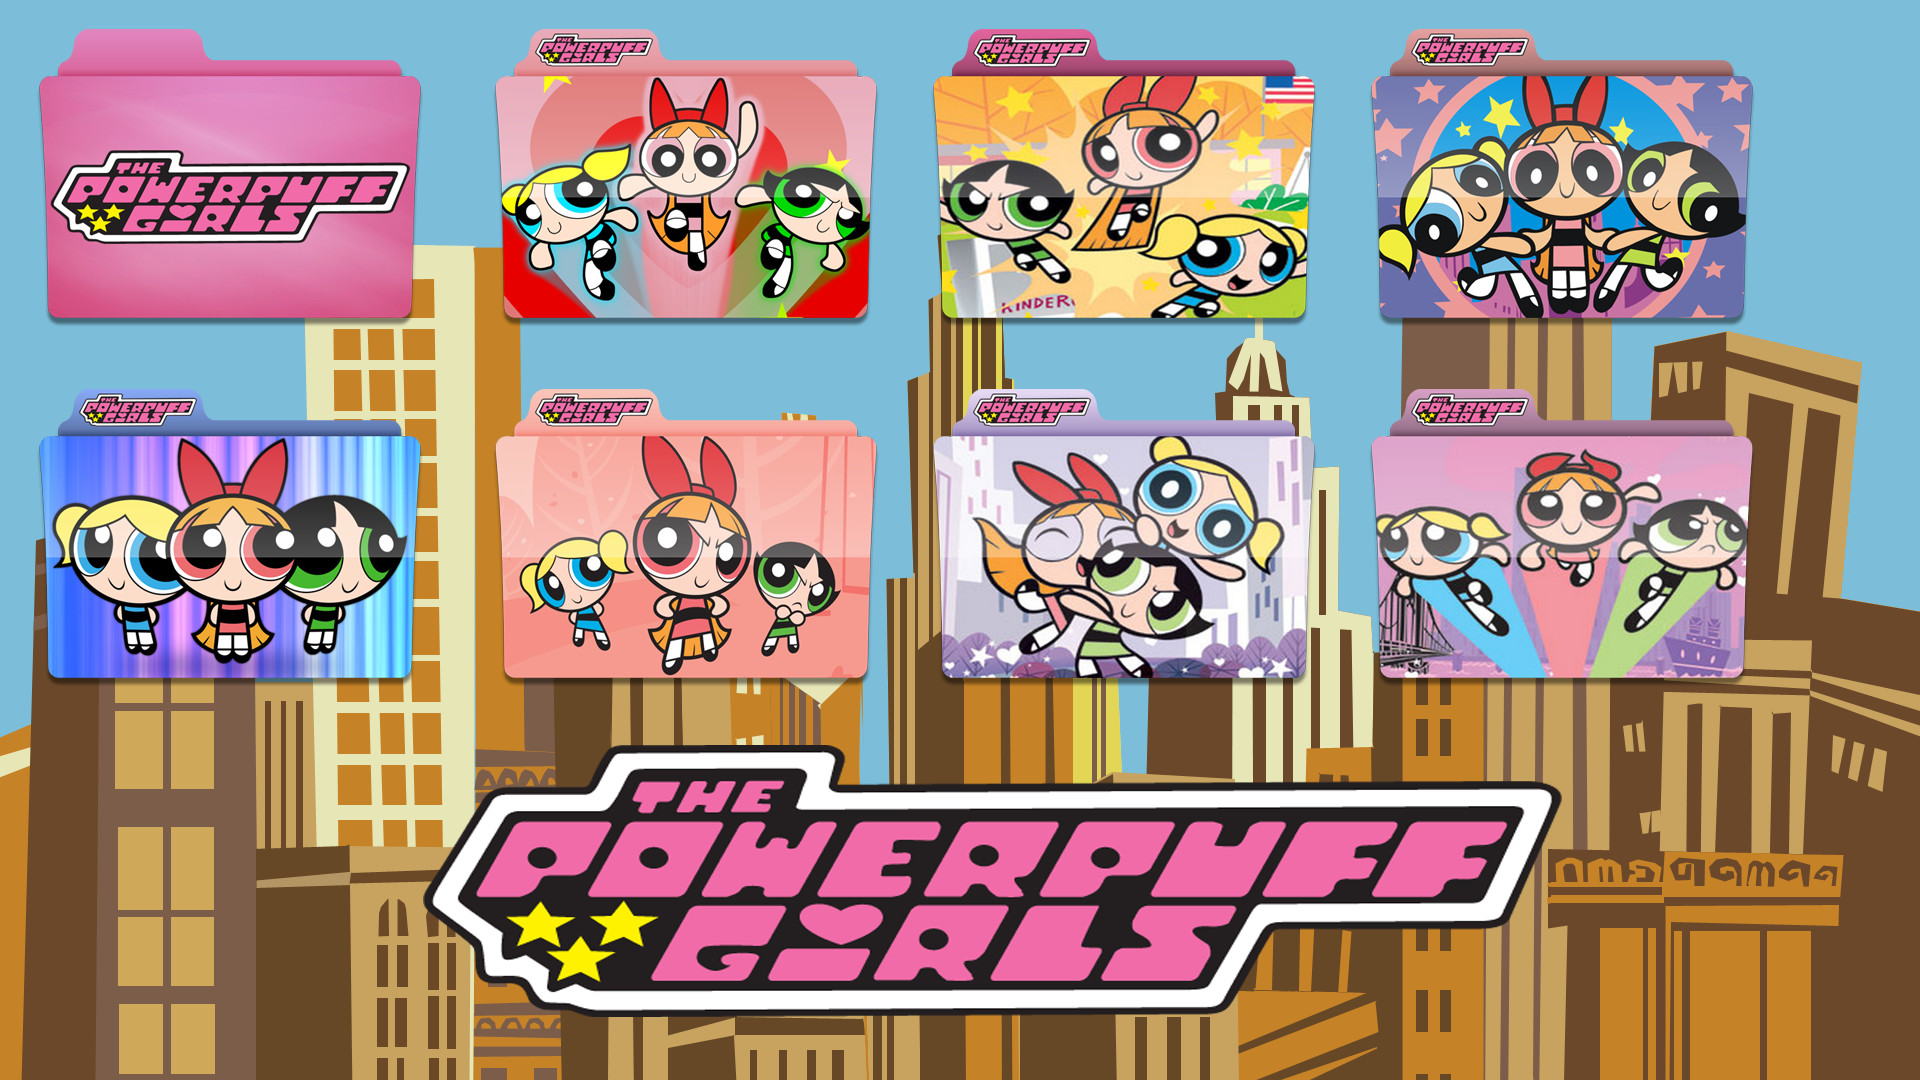 The Powerpuff Girls Wallpapers (69+ images)